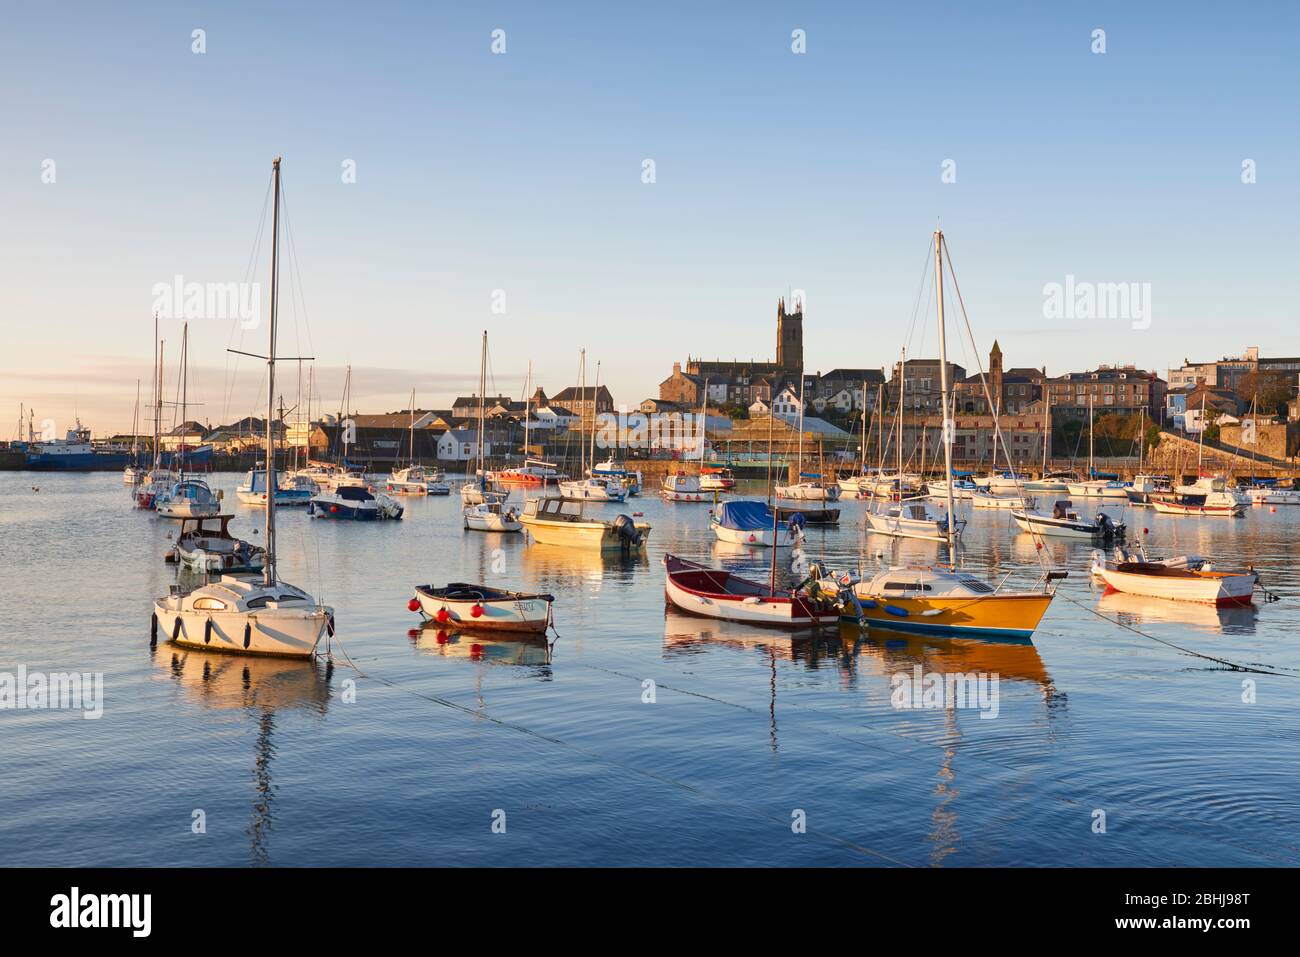 The first light of the morning sun shining over Penzance Harbour Stock Photo